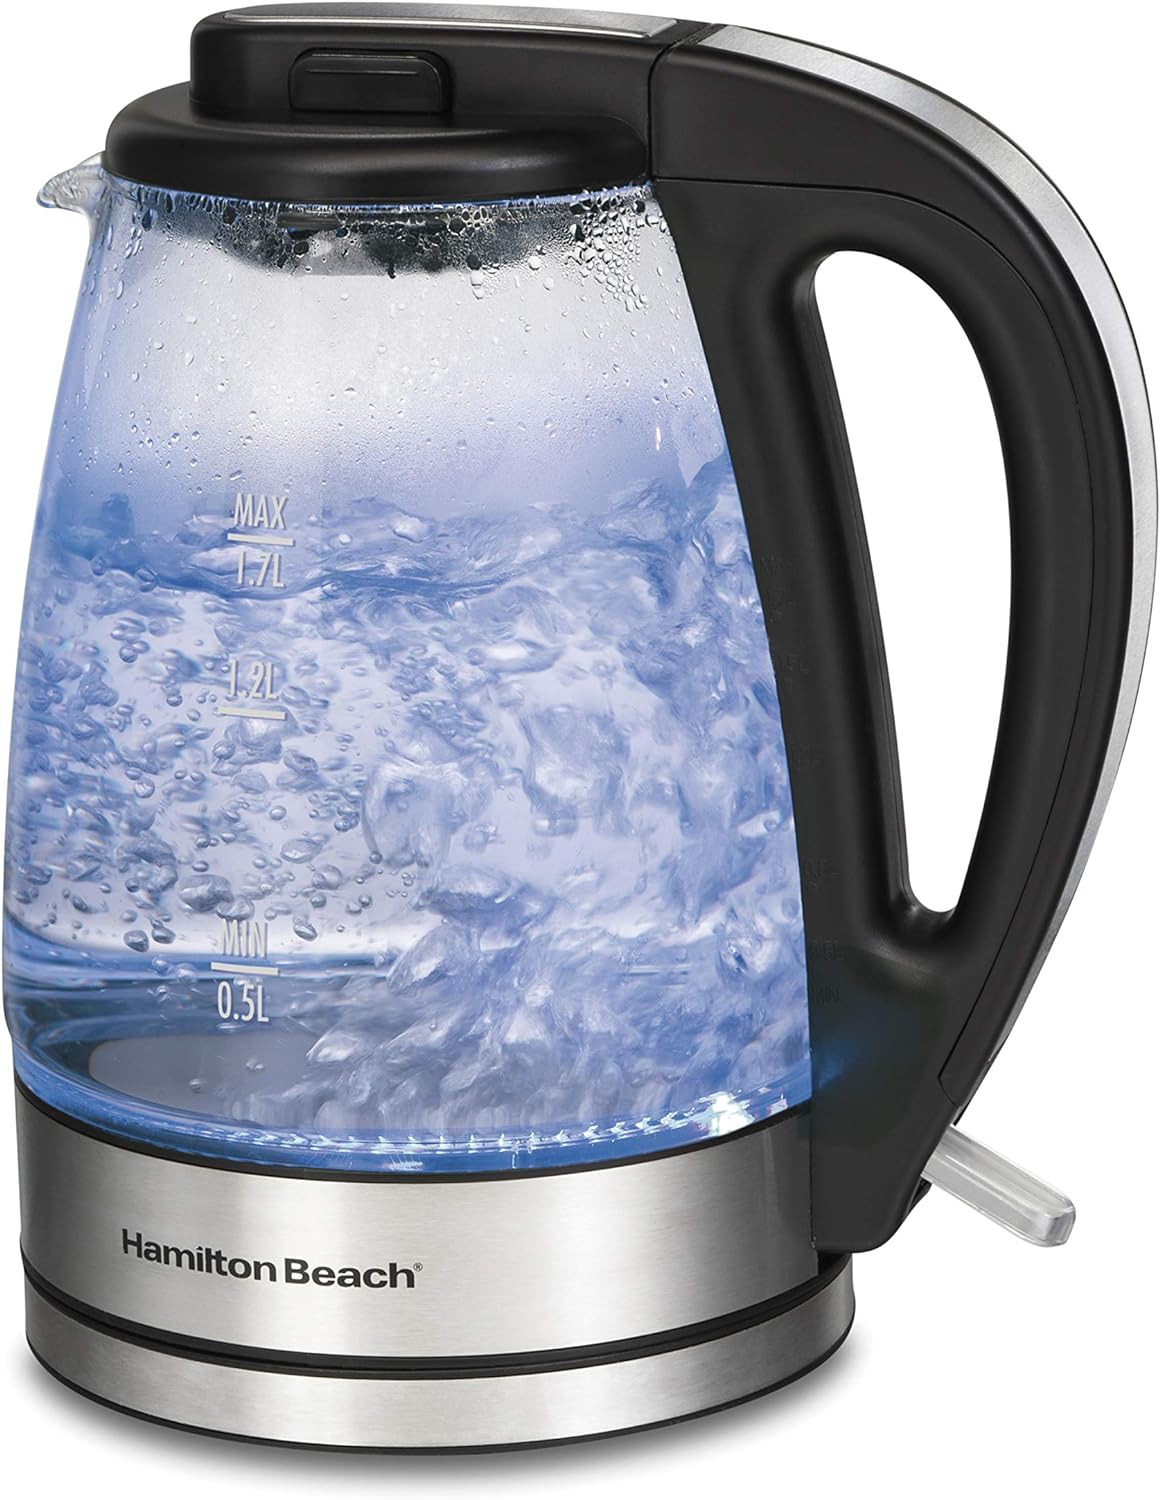 The Hamilton Beach 1.7L Electric Tea Kettle (40864) has become an indispensable part of my daily routine, bringing both style and efficiency to my tea preparation.The clear glass design is not only visually appealing but also functional, allowing me to monitor the water level easily. The LED indicator adds a touch of modernity, providing a clear signal when the water is ready. The cordless serving feature makes pouring a seamless and tangle-free experience.The built-in mesh filter is a thoughtfu